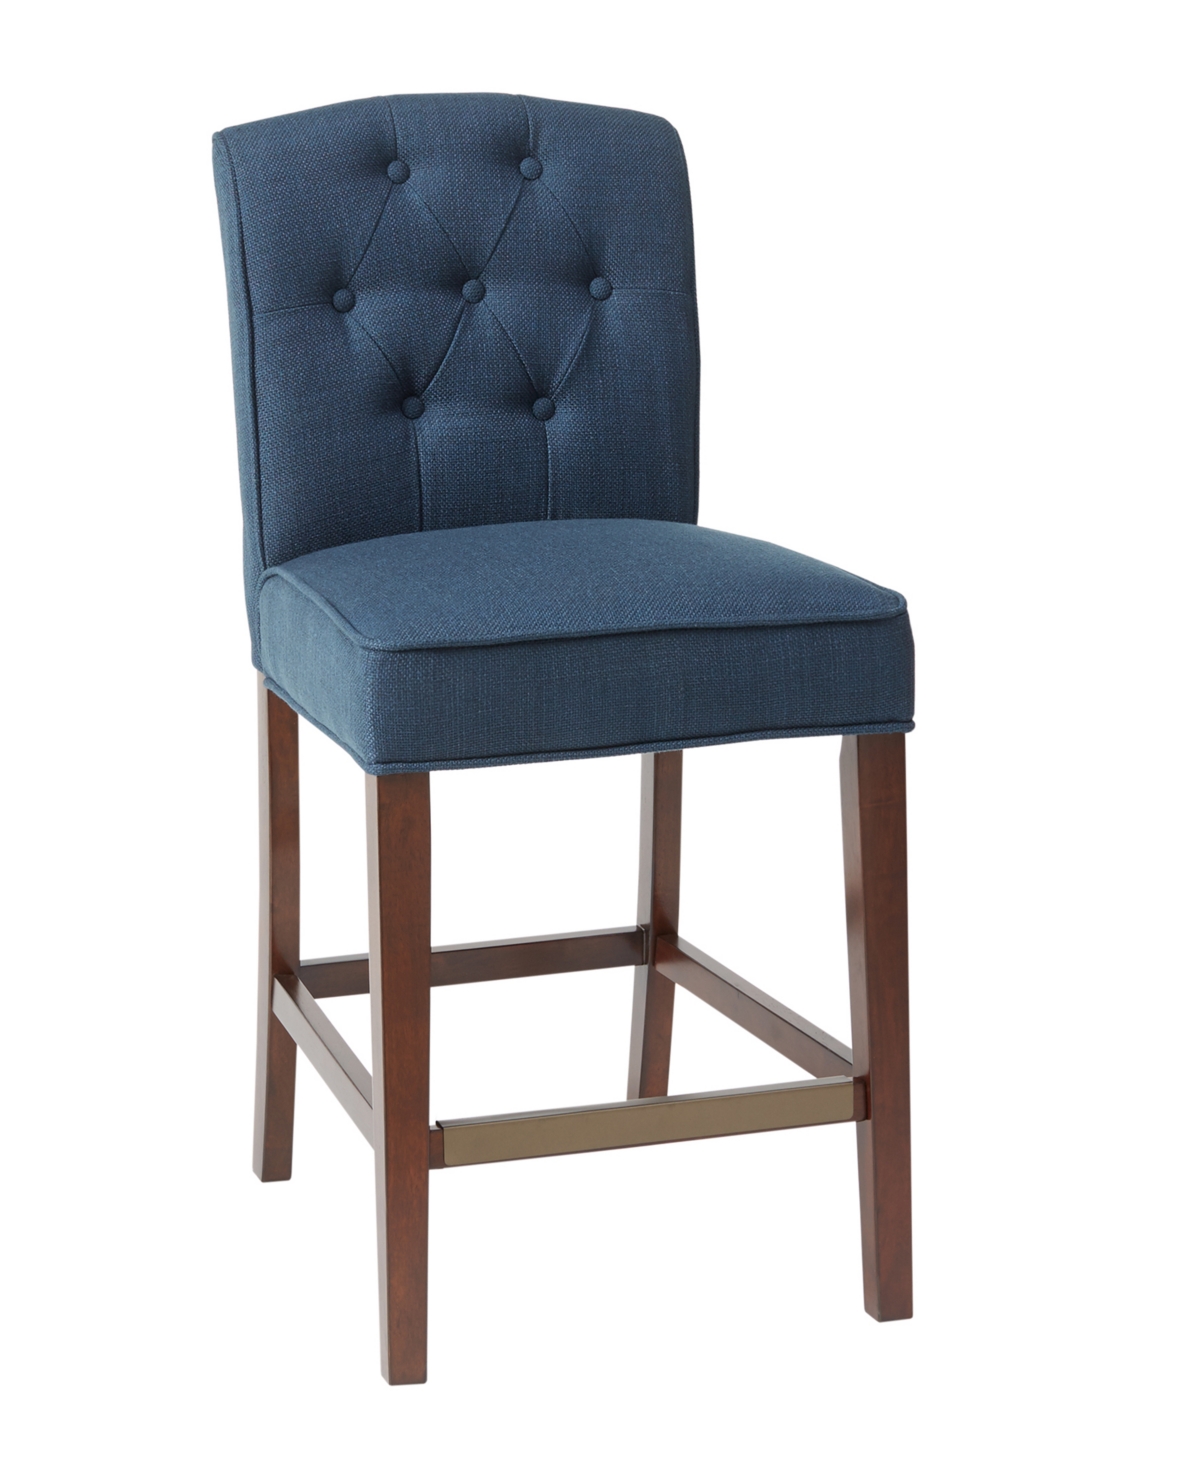 Madison Park Marian 19.5" Wide Fabric Tufted Counter Stool In Navy